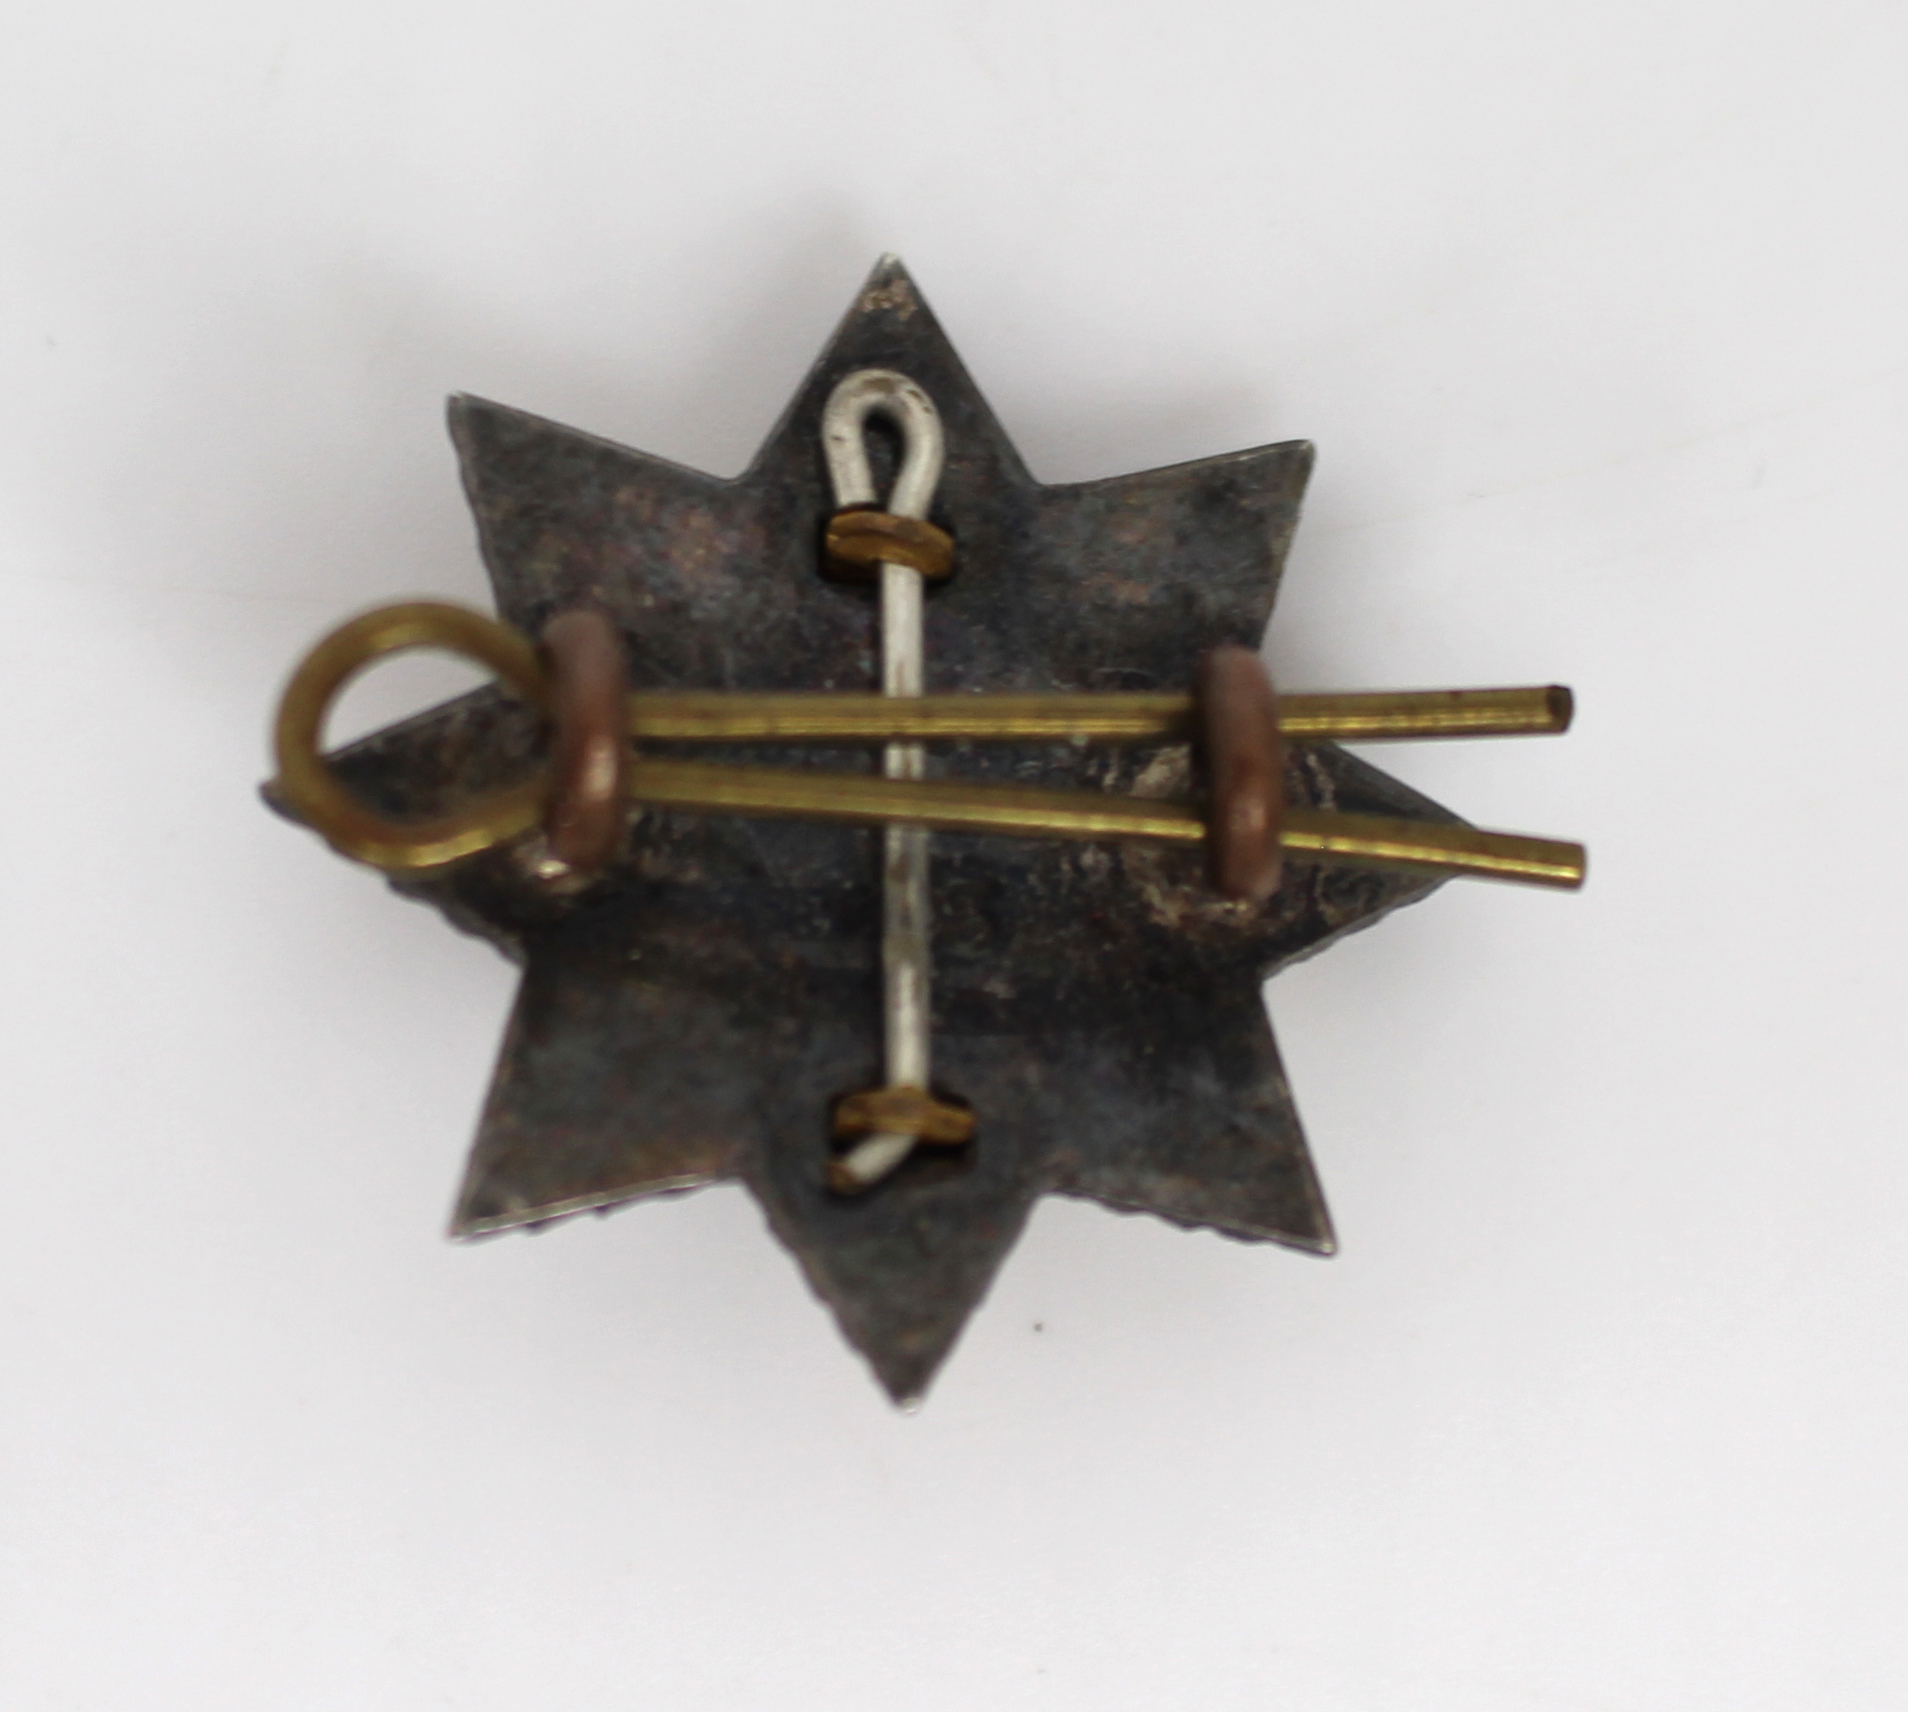 Royal Lincolnshire Regiment Egypt Sweetheart Brooch by J R Gaunt - Image 2 of 2